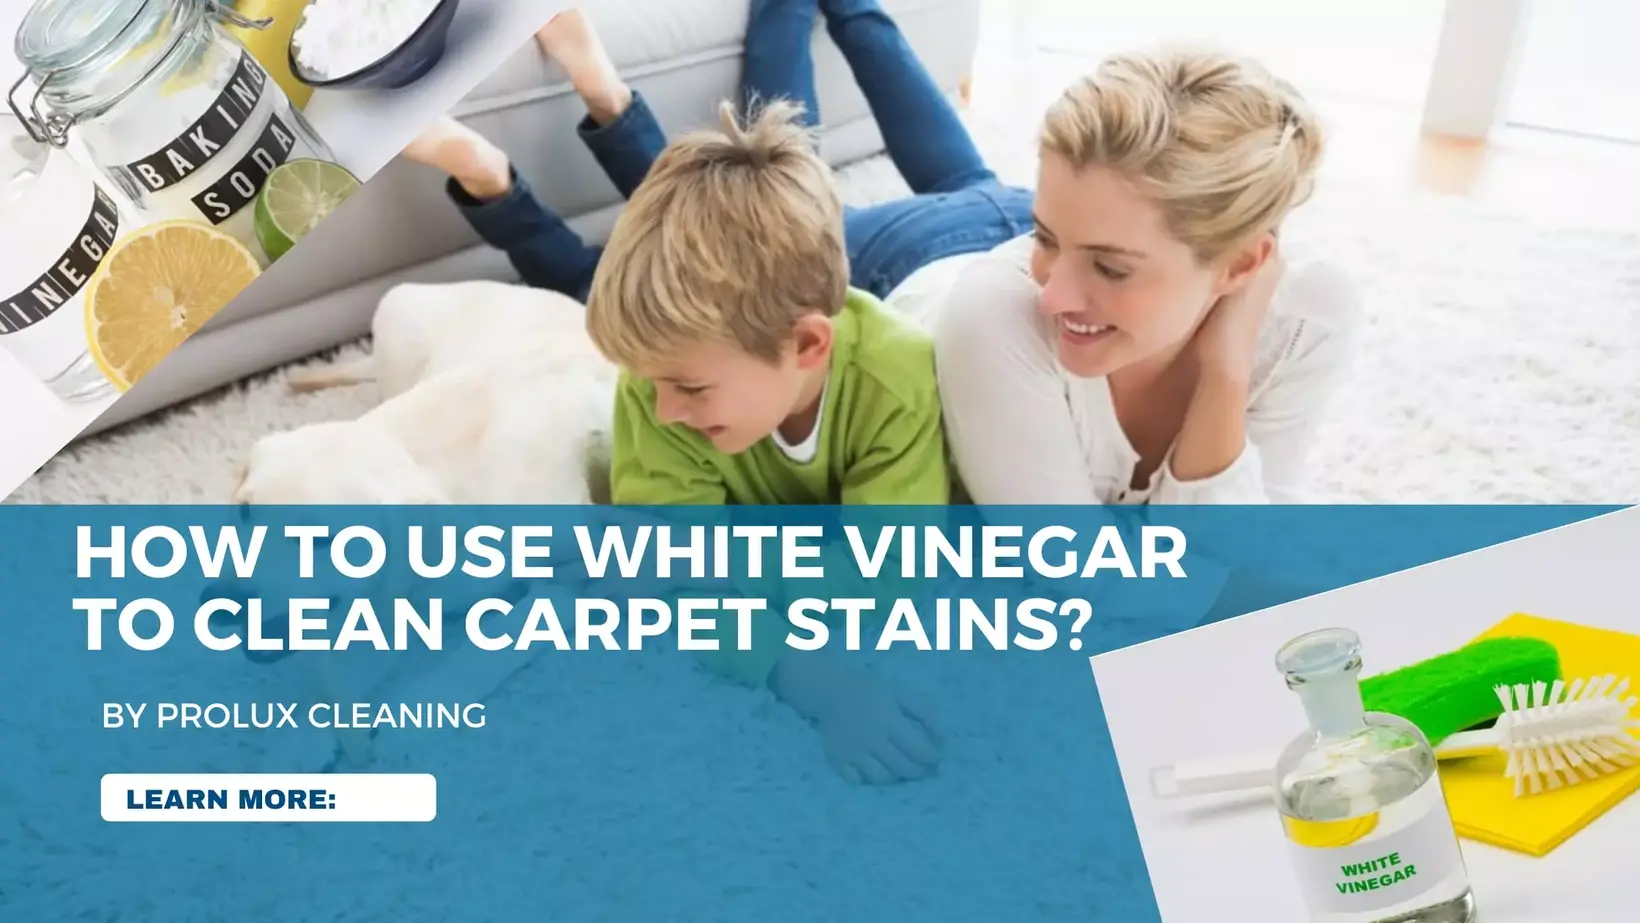 Can you use malt vinegar for cleaning? Best alternatives to white